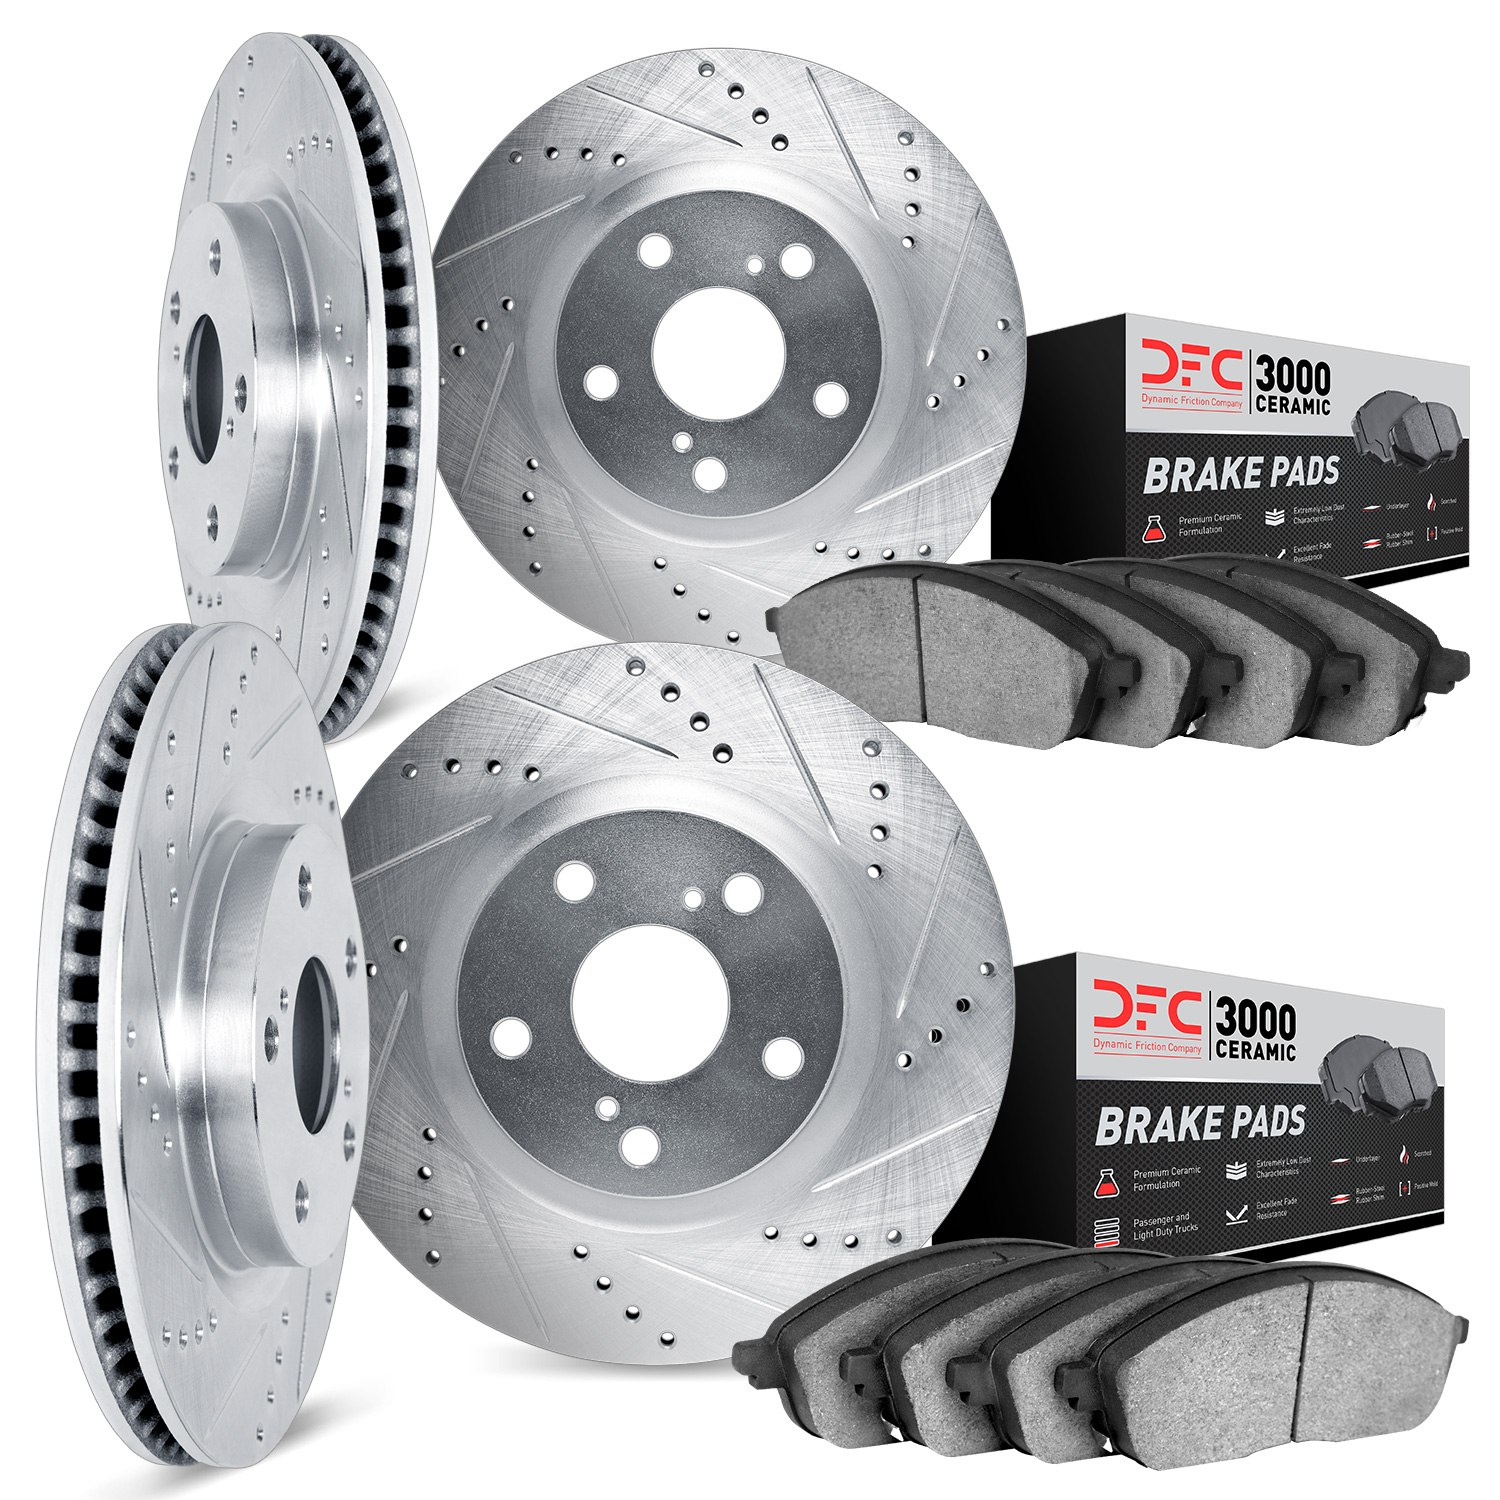 7304-39020 Drilled/Slotted Brake Rotor with 3000-Series Ceramic Brake Pads Kit [Silver], 2006-2014 Mopar, Position: Front and Re